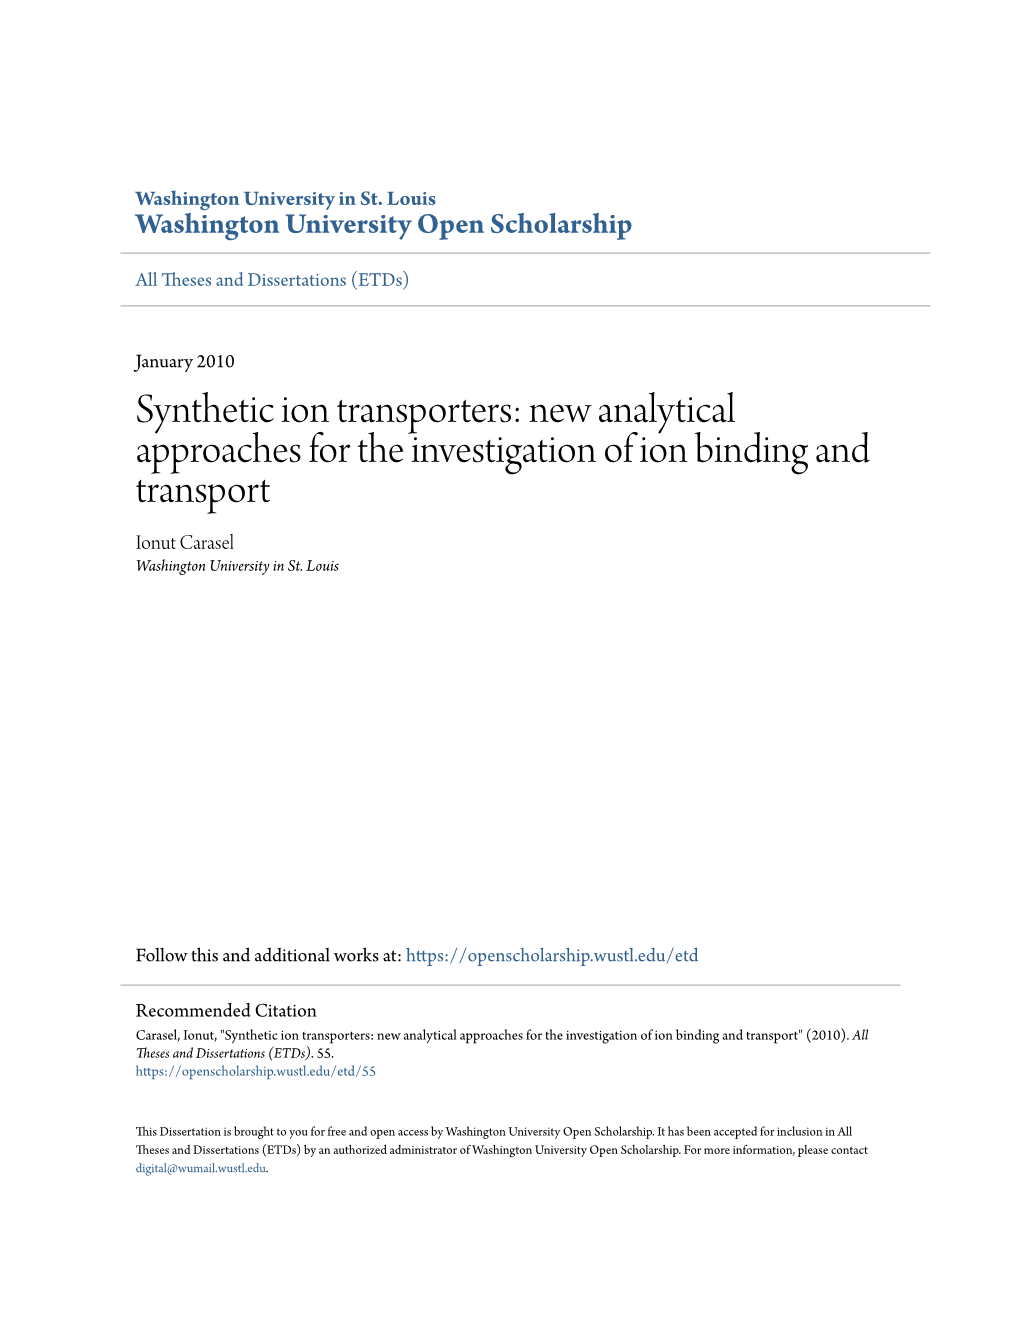 Synthetic Ion Transporters: New Analytical Approaches for the Investigation of Ion Binding and Transport Ionut Carasel Washington University in St